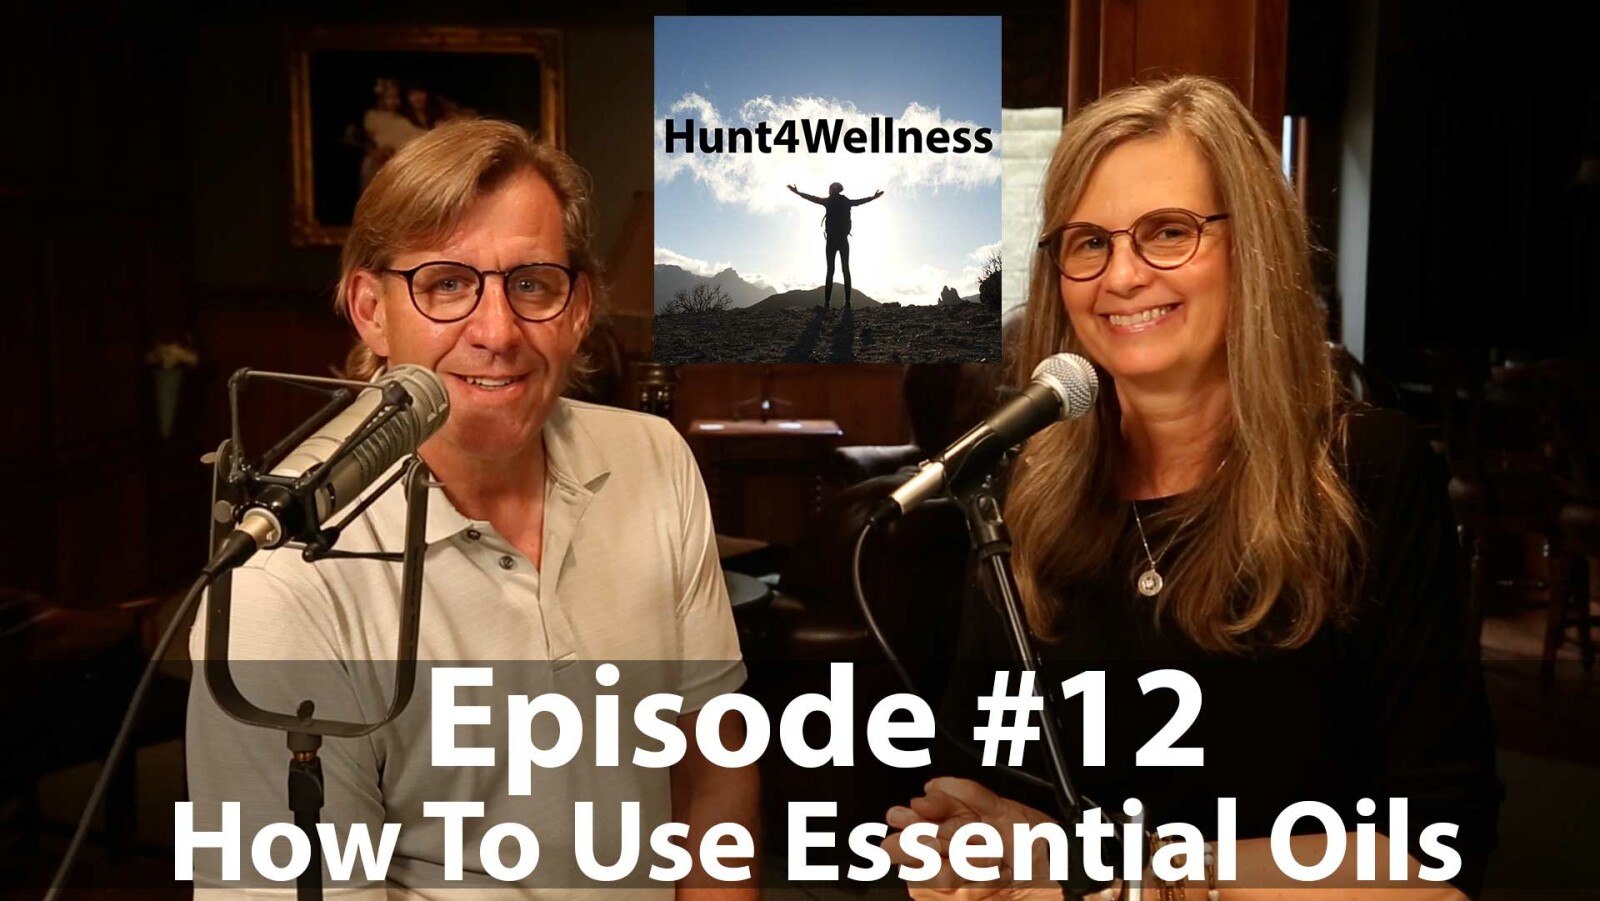 Episode #12 - How To Use Essential Oils